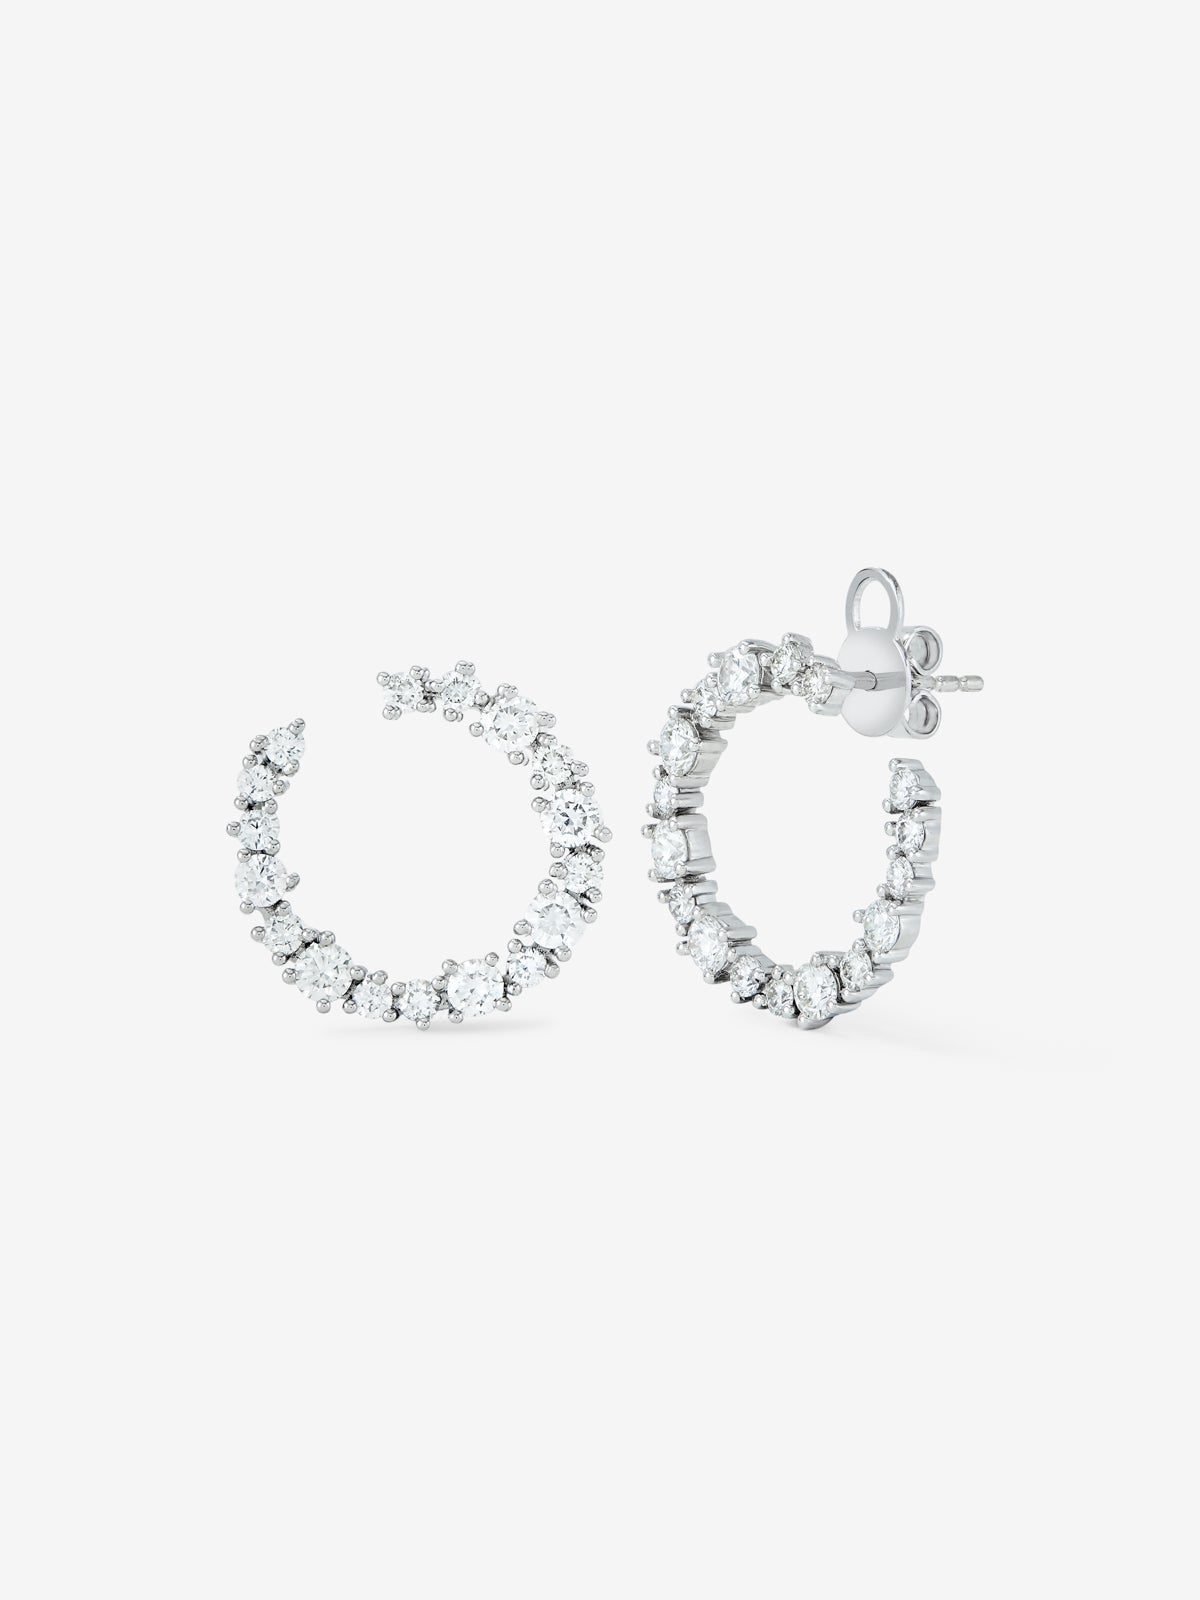 18K white gold hoop earrings with 34 brilliant-cut diamonds with a total of 1.84 cts